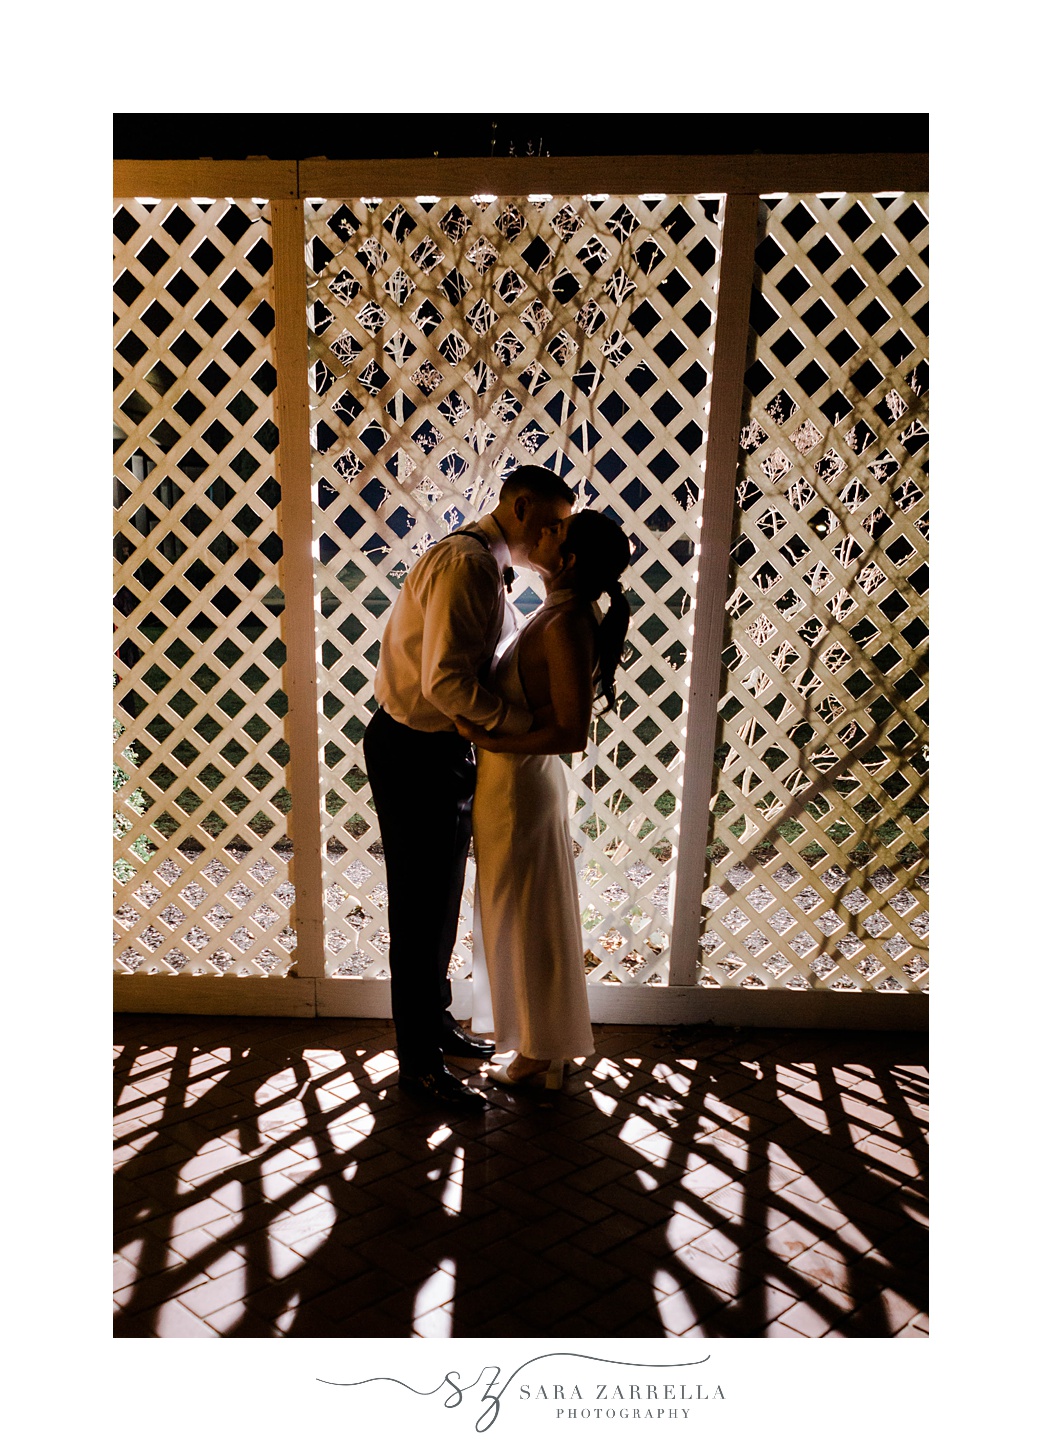 bride and groom kiss at night against white lattice fence